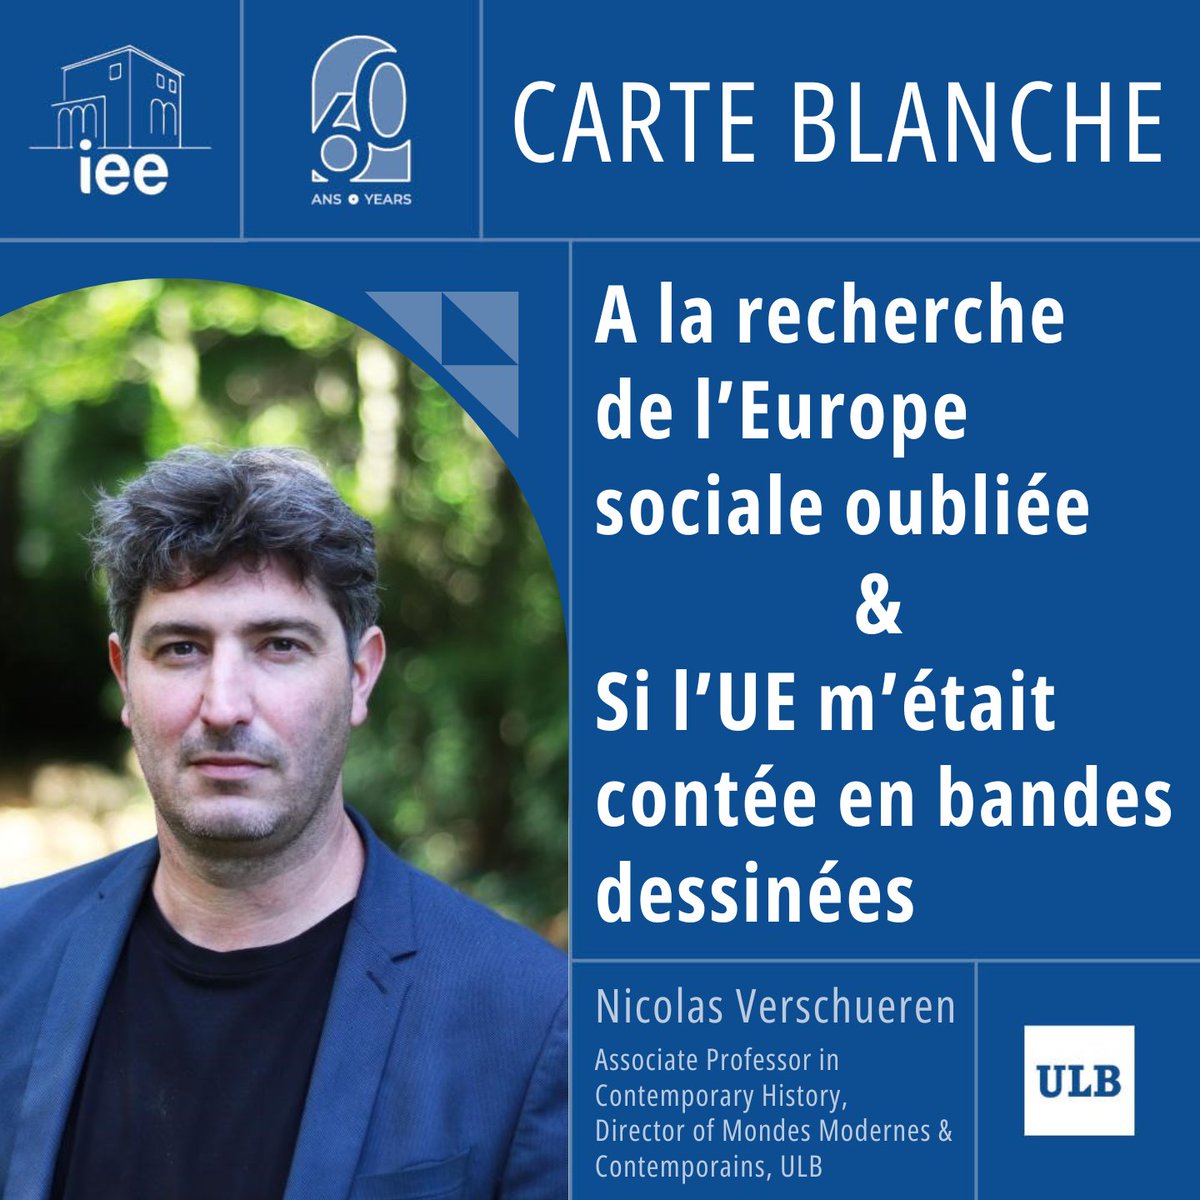 📝To open a new thematic chapter on Social Europe, we publish this week two articles by Nicolas Verschueren, Associate Professor in Contemporary History et Director of Centre Mondes Modernes & Contemporains of the ULB. Read the article👉bit.ly/44maxv8 #IEE60